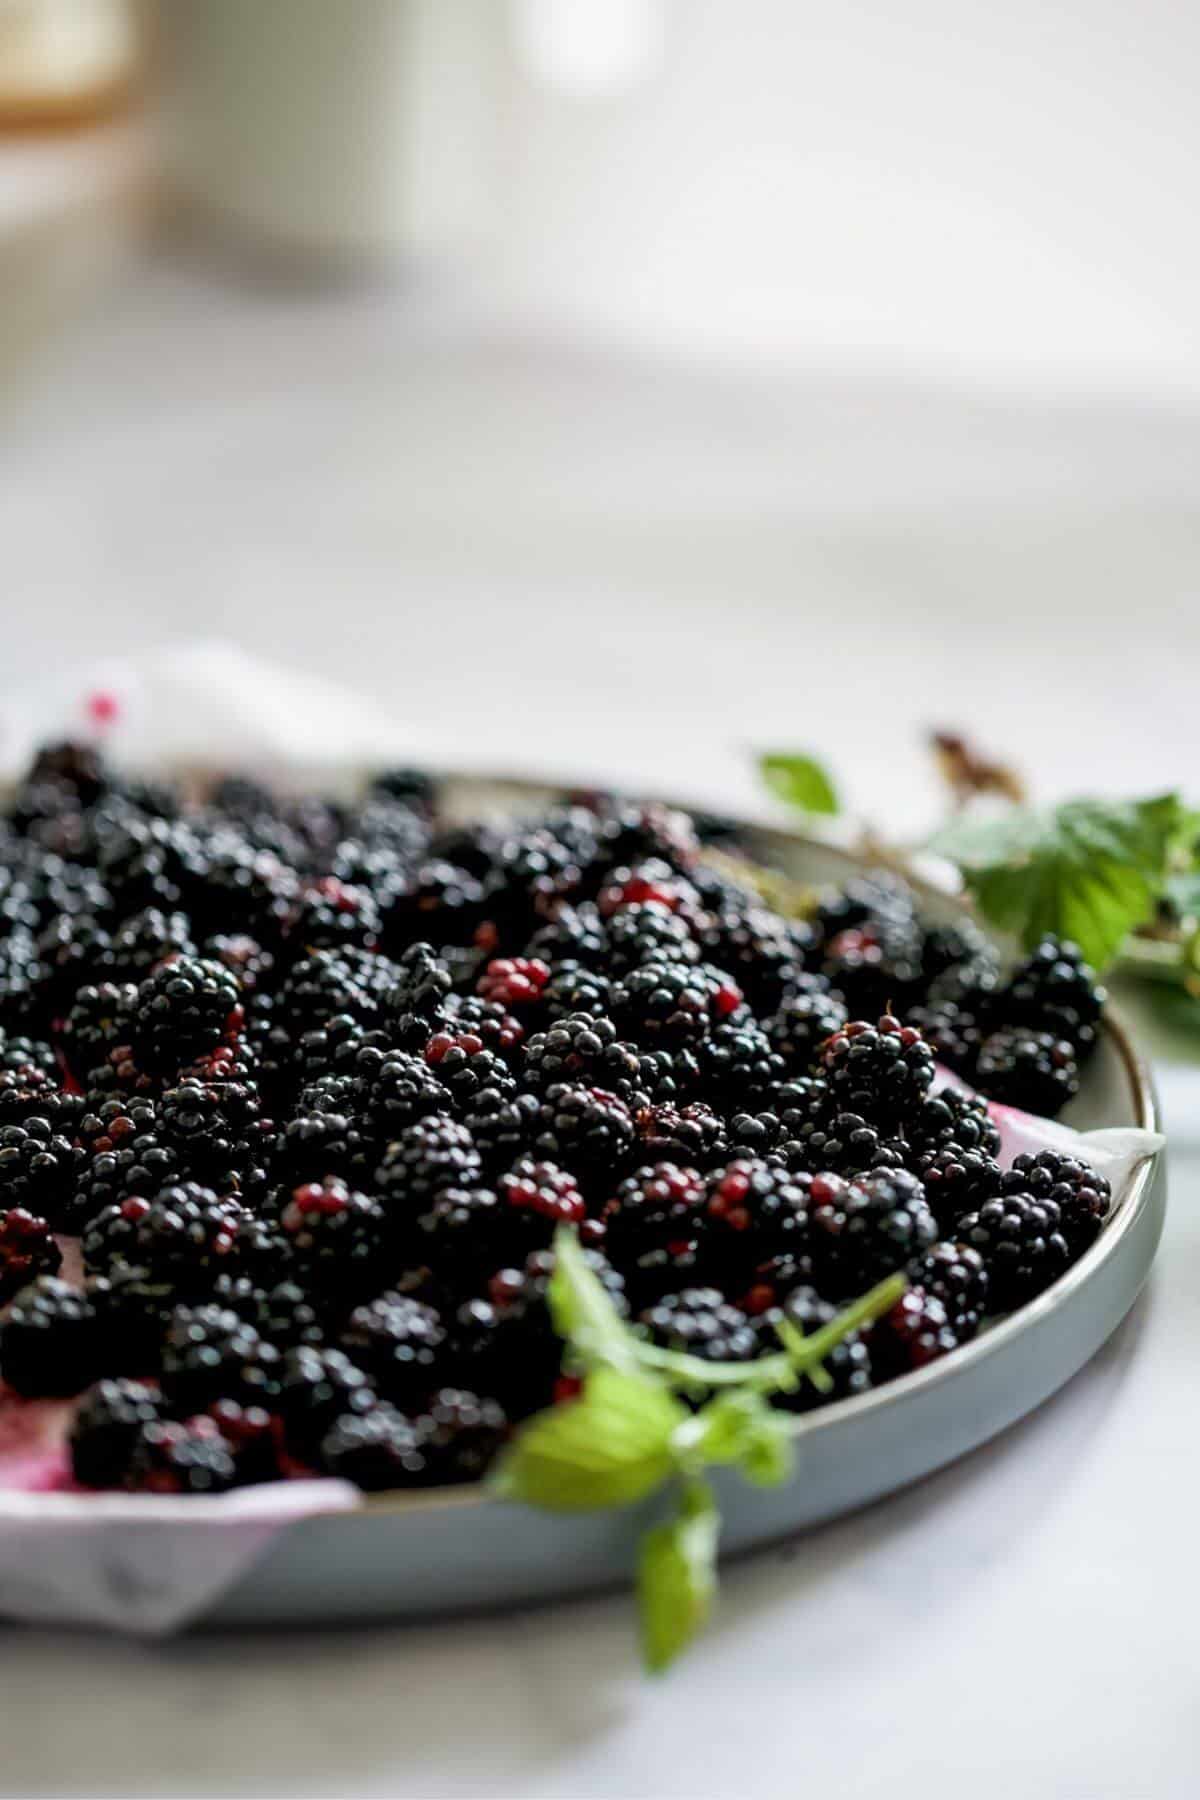 Blackberries are left to dry on a paper towel covered dinner plate.